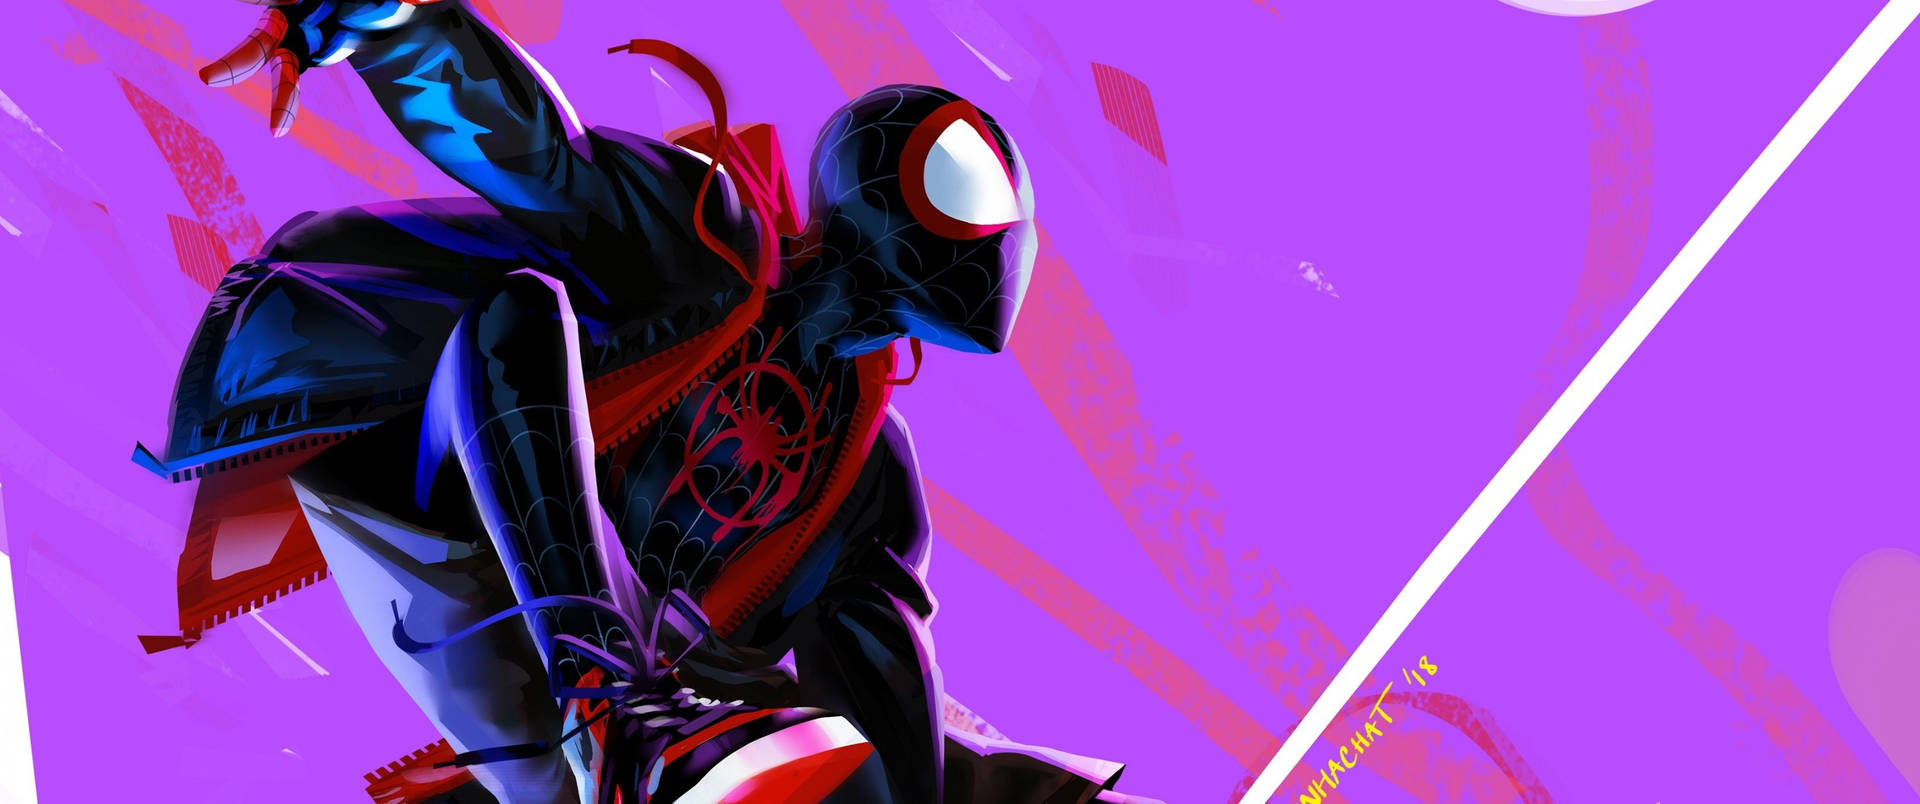 Get ready to swing into action with "Spider-Man: Into The Spider-Verse"! Wallpaper